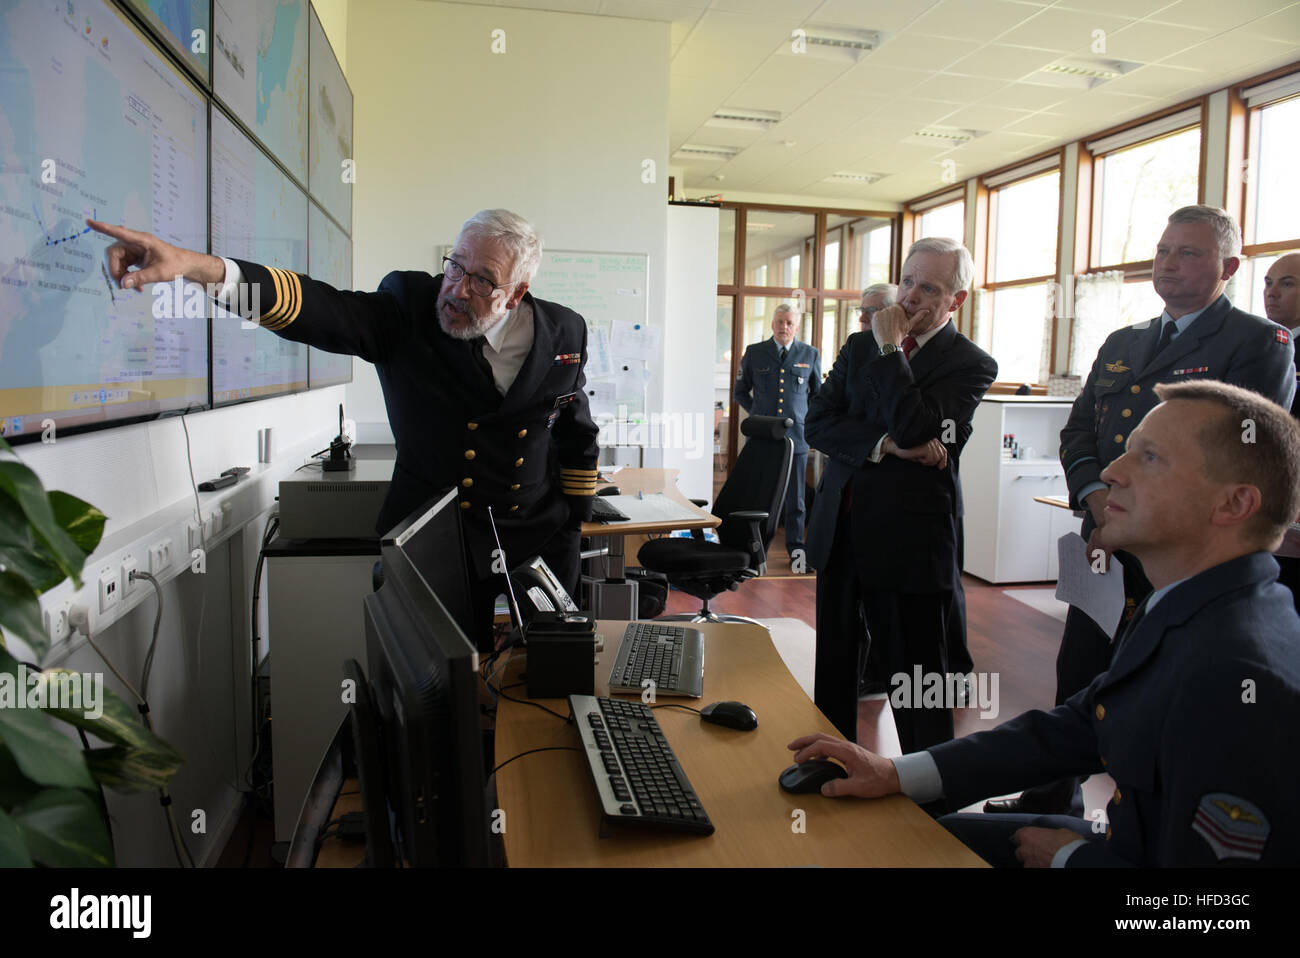 THORSHAVN, Faroe Islands (June 24, 2016) Secretary of the Navy (SECNAV) Ray Mabus tours the Royal Danish Navy Joint Arctic Command unit in Thorshavn. Mabus is in the area as part of a multinational tour to the European Command area of responsibility to meet Sailors and Marines, and government and military leaders. (U.S. Navy photo by Mass Communication Specialist 1st Class Armando Gonzales/Released) 160624-N-LV331-003 Join the conversation: http://www.navy.mil/viewGallery.asp http://www.facebook.com/USNavy http://www.twitter.com/USNavy http://navylive.dodlive.mil http://pinterest.com https://p Stock Photo